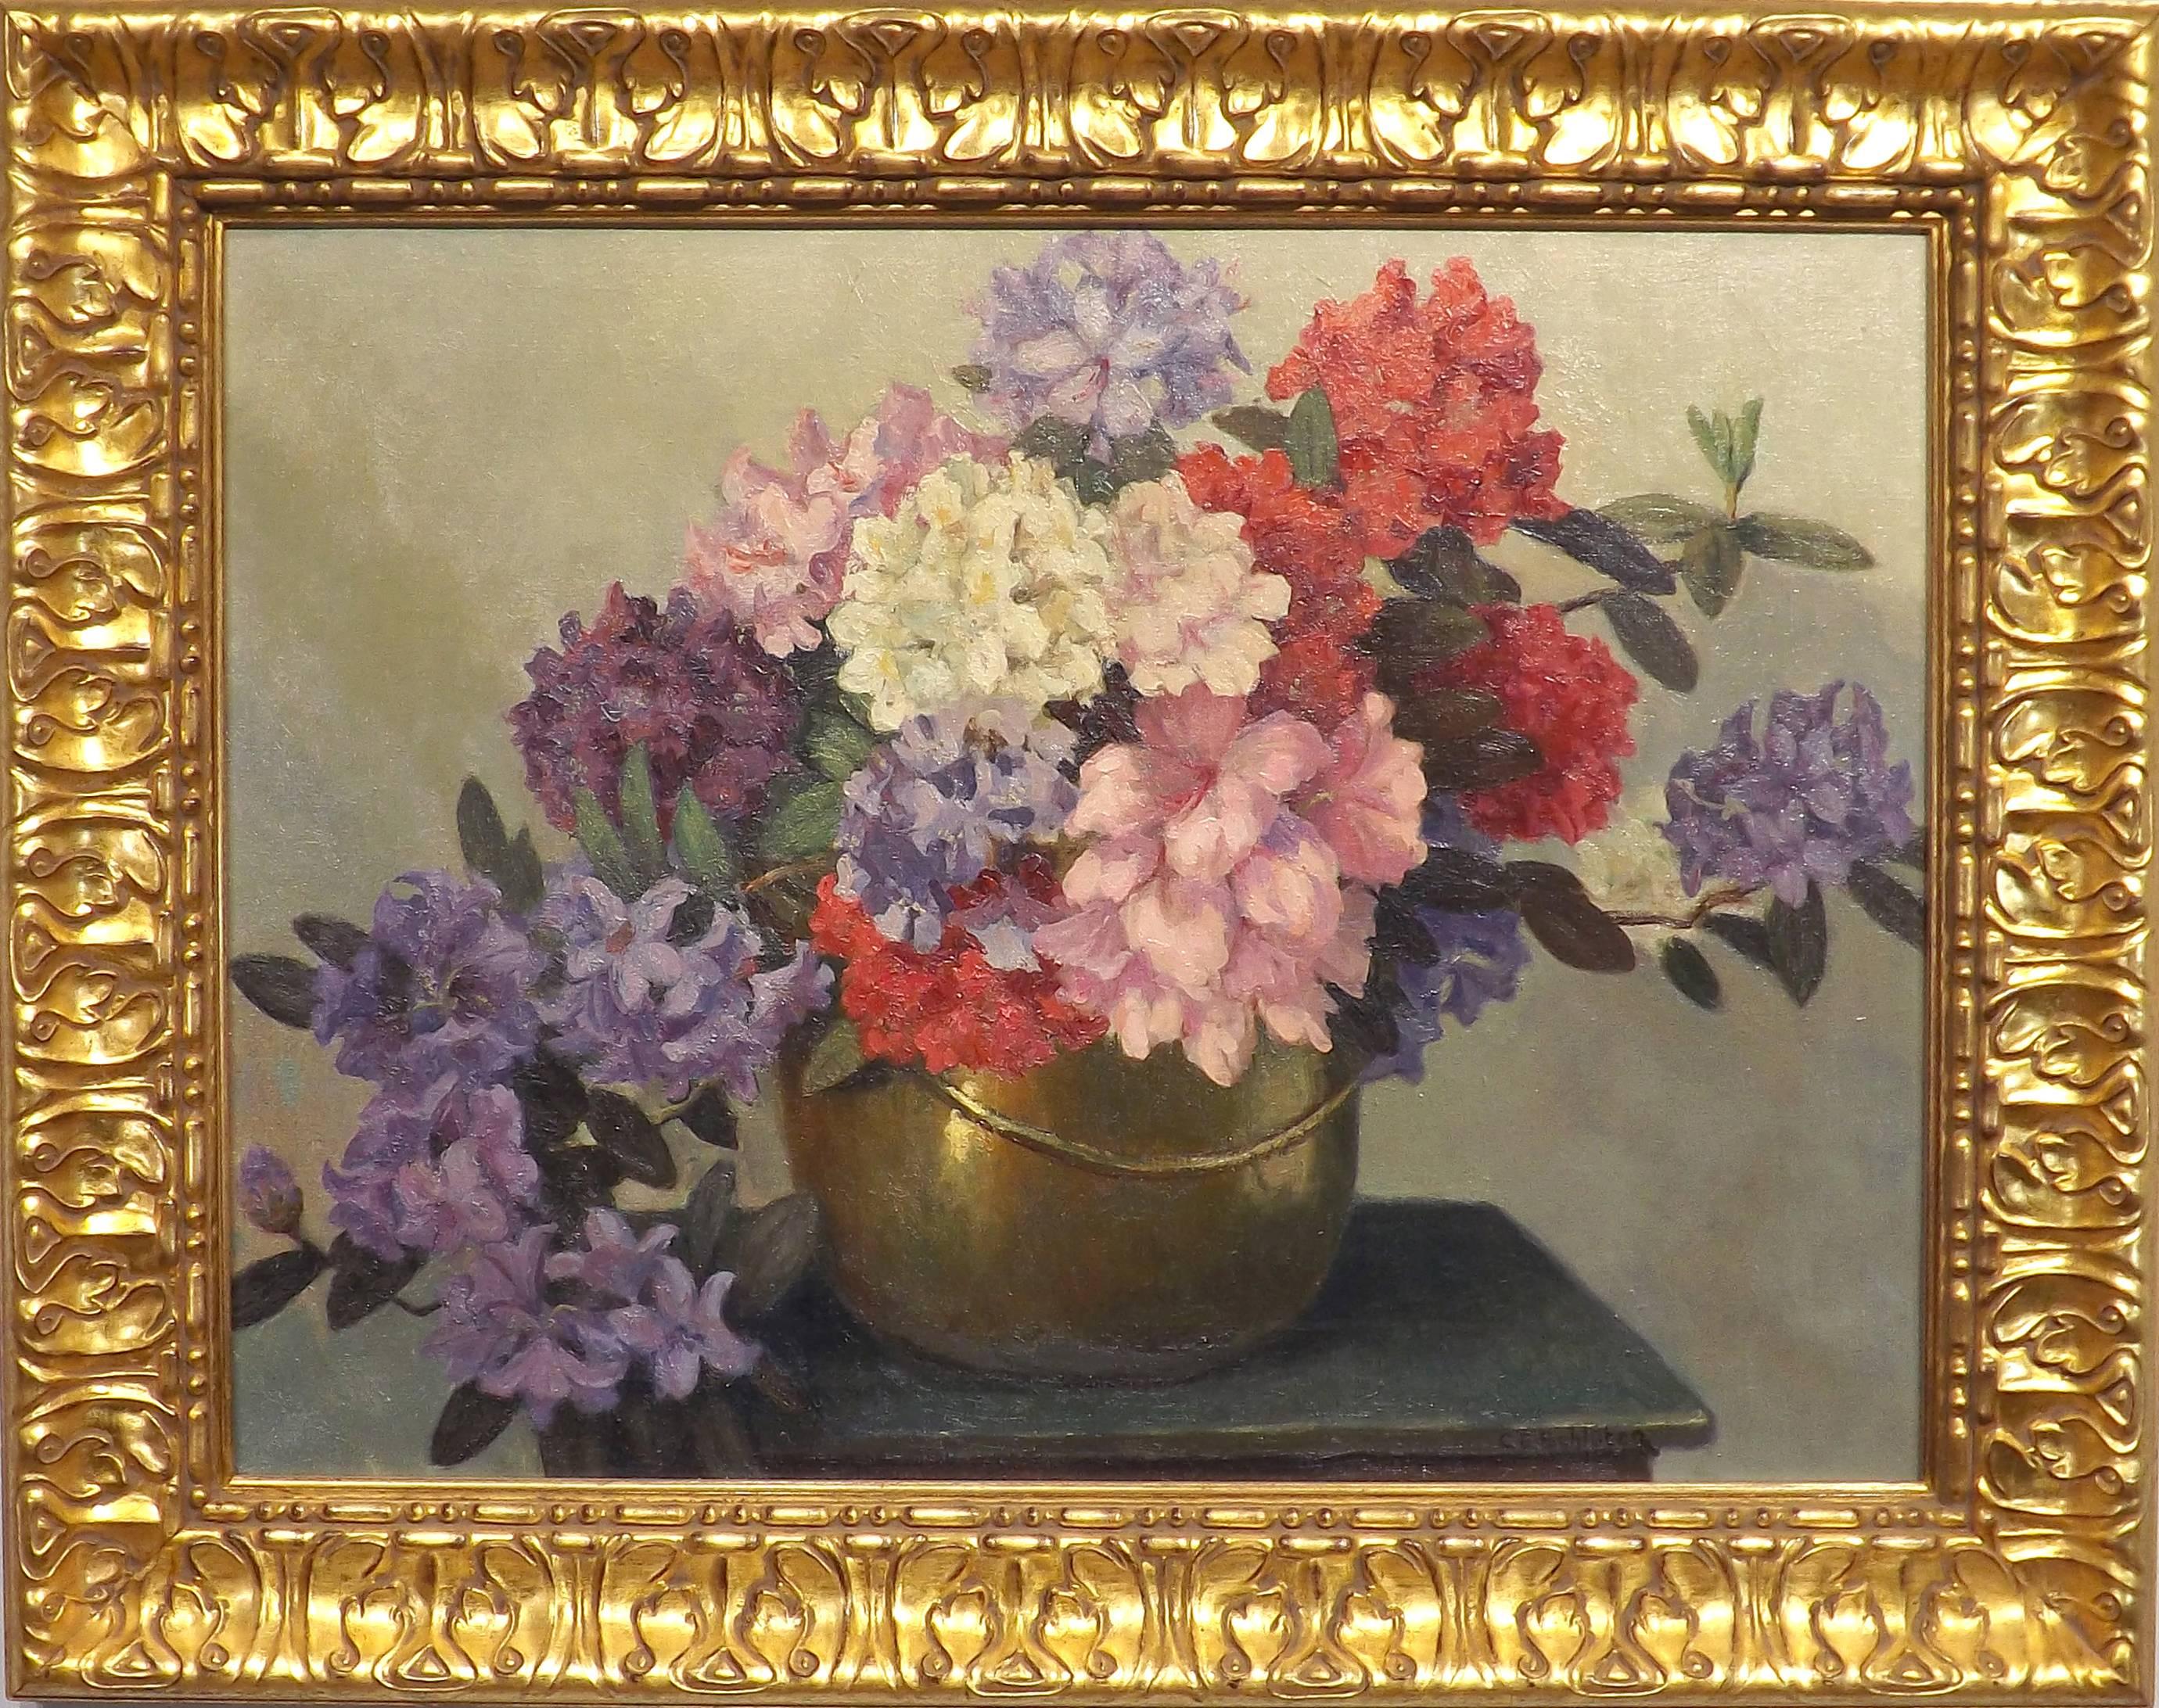 A wonderful floral painting of rhododendrons in a shiny copper kettle. Painted by Carl Schlüter (1886-1973), a graduate of the Royal Academy of Fine art in Amsterdam. He worked in Amsterdam, Dordrecht, Laren (NH) and in 1924 he established himself